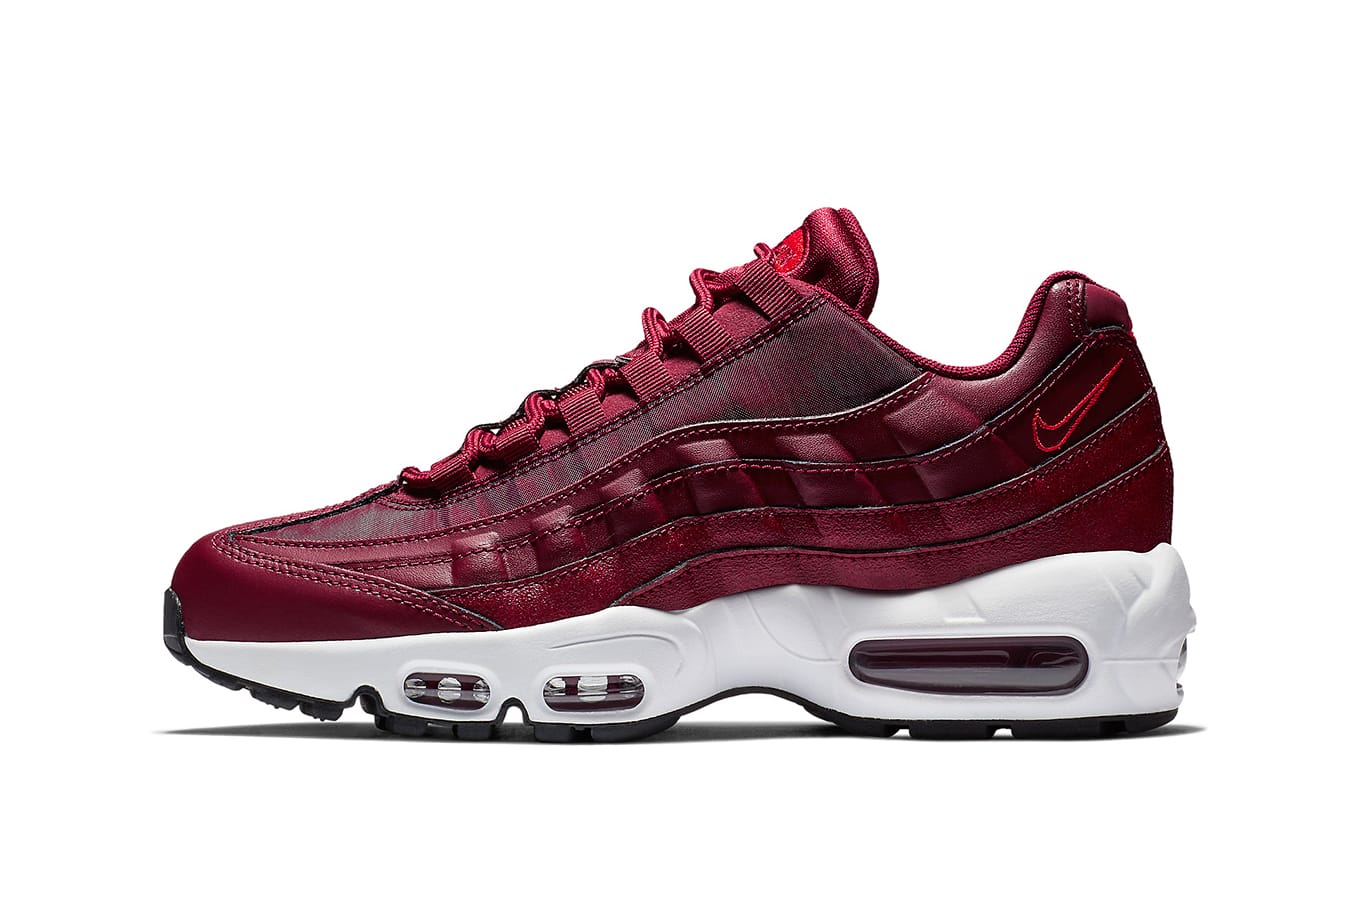 Nike Air Max 95 “Team Red” Release 